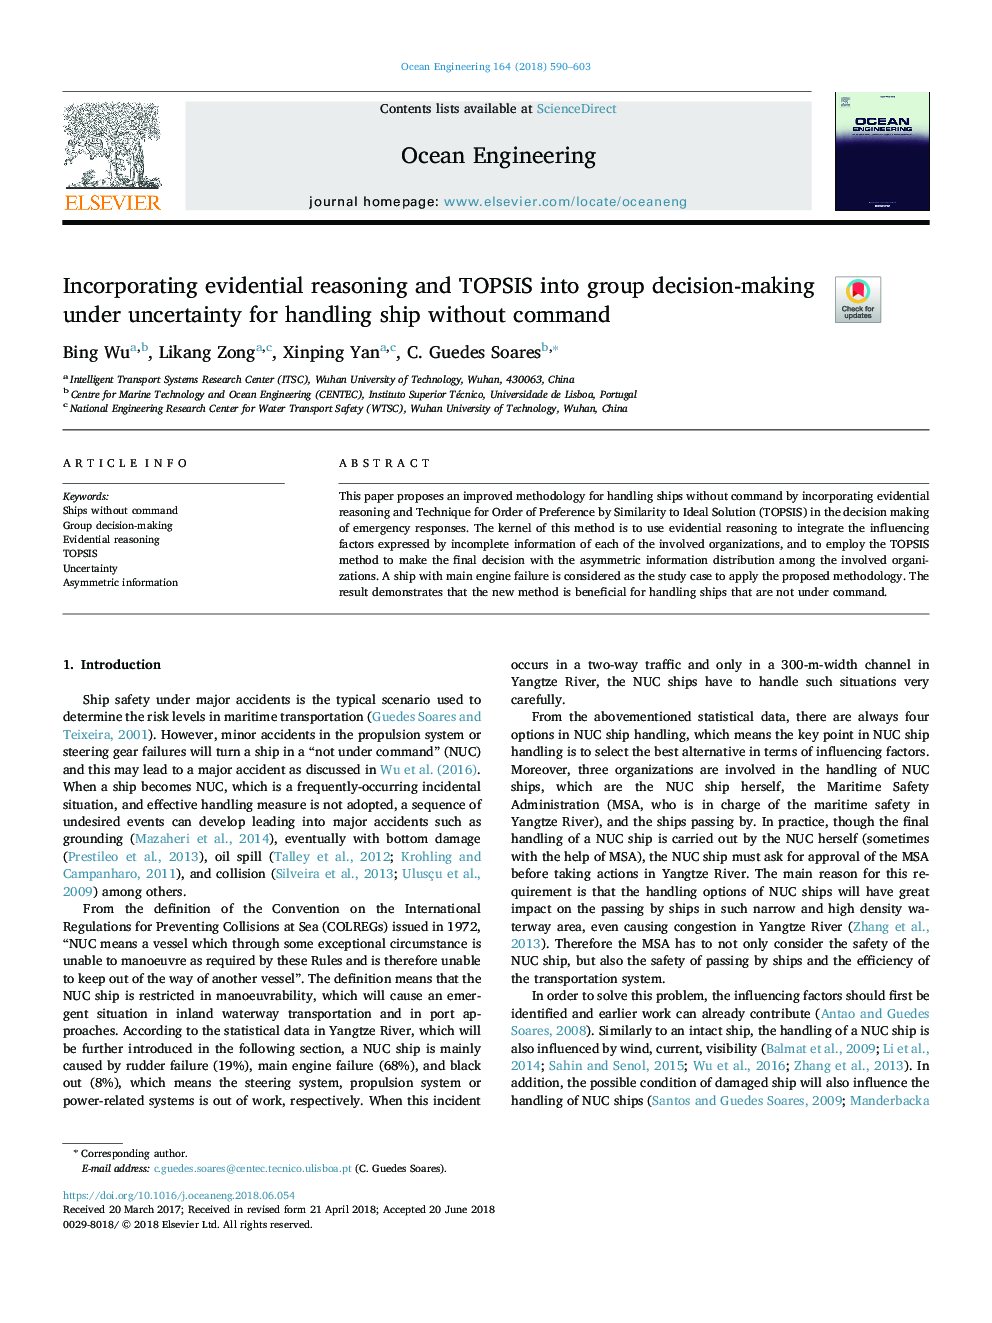 Incorporating evidential reasoning and TOPSIS into group decision-making under uncertainty for handling ship without command